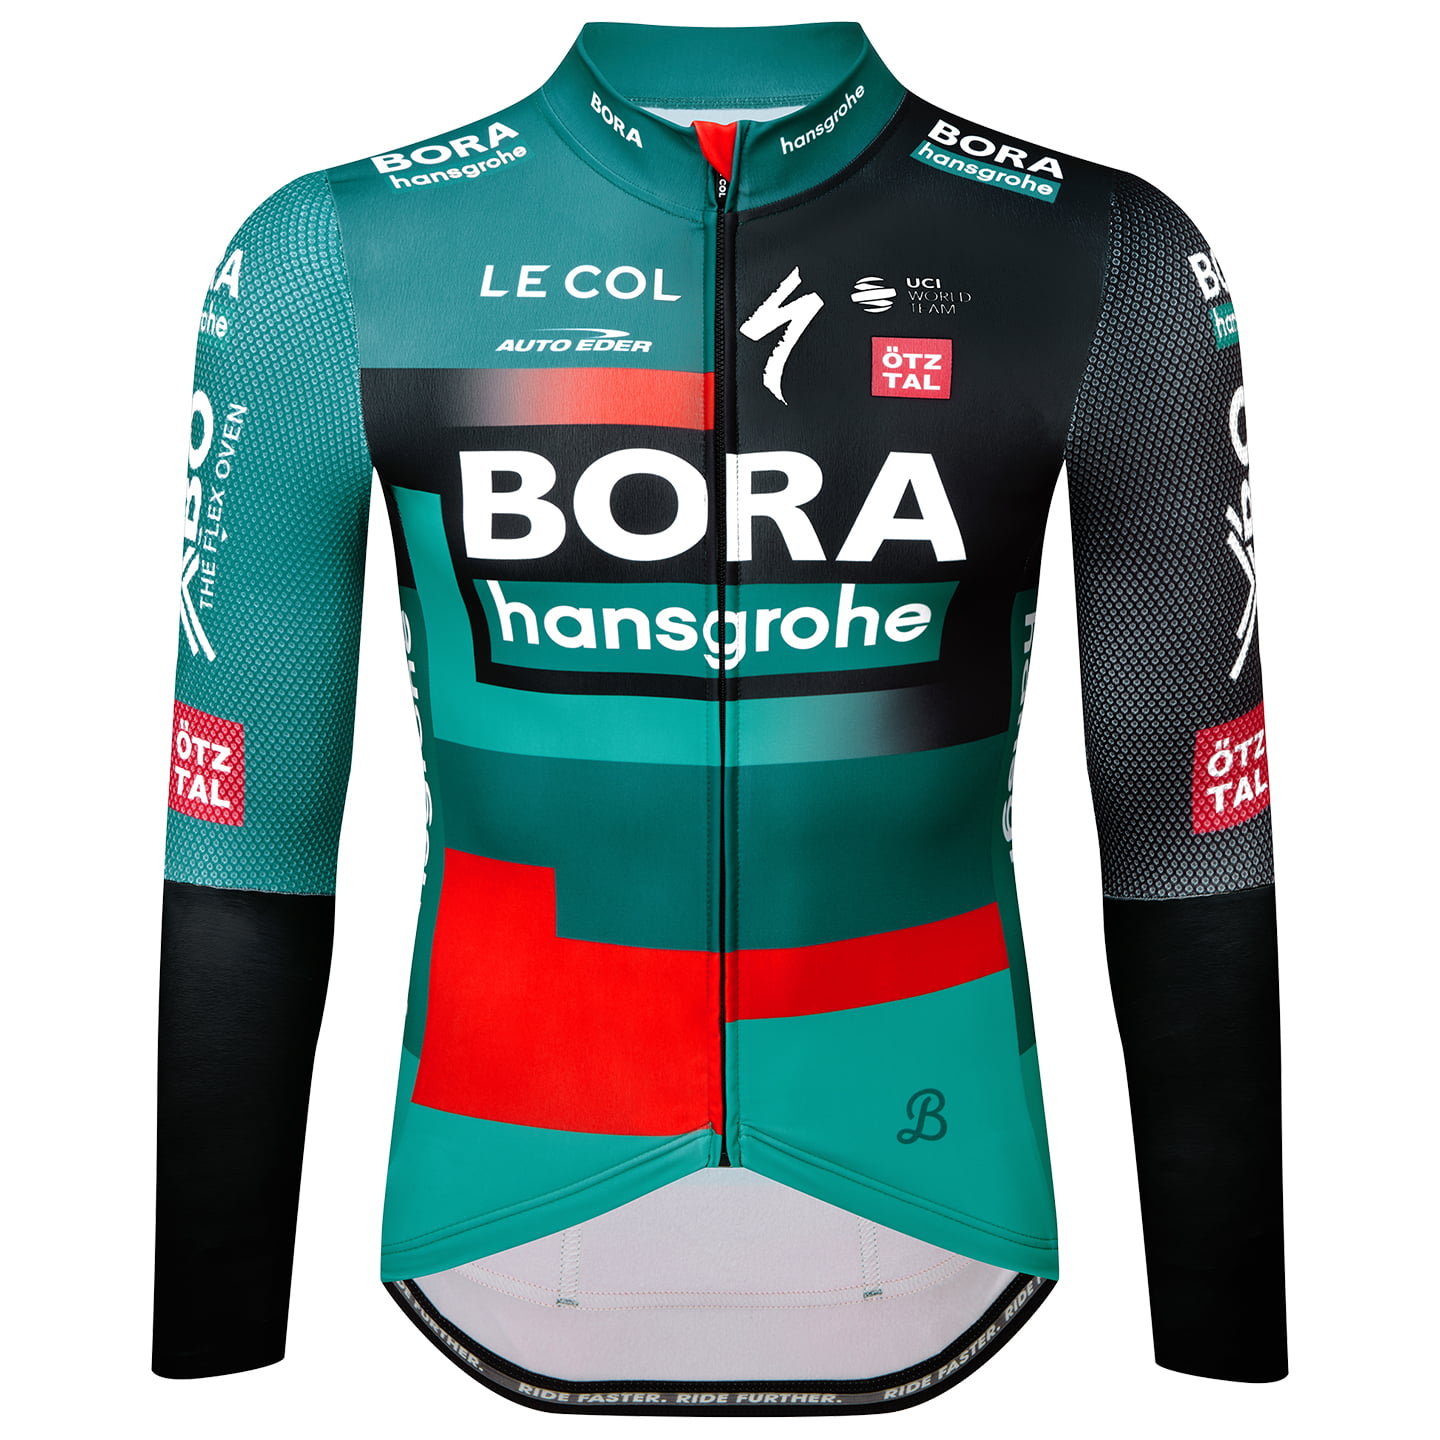 BORA-hansgrohe Race 2023 Long Sleeve Jersey, for men, size M, Cycle jersey, Cycling clothing